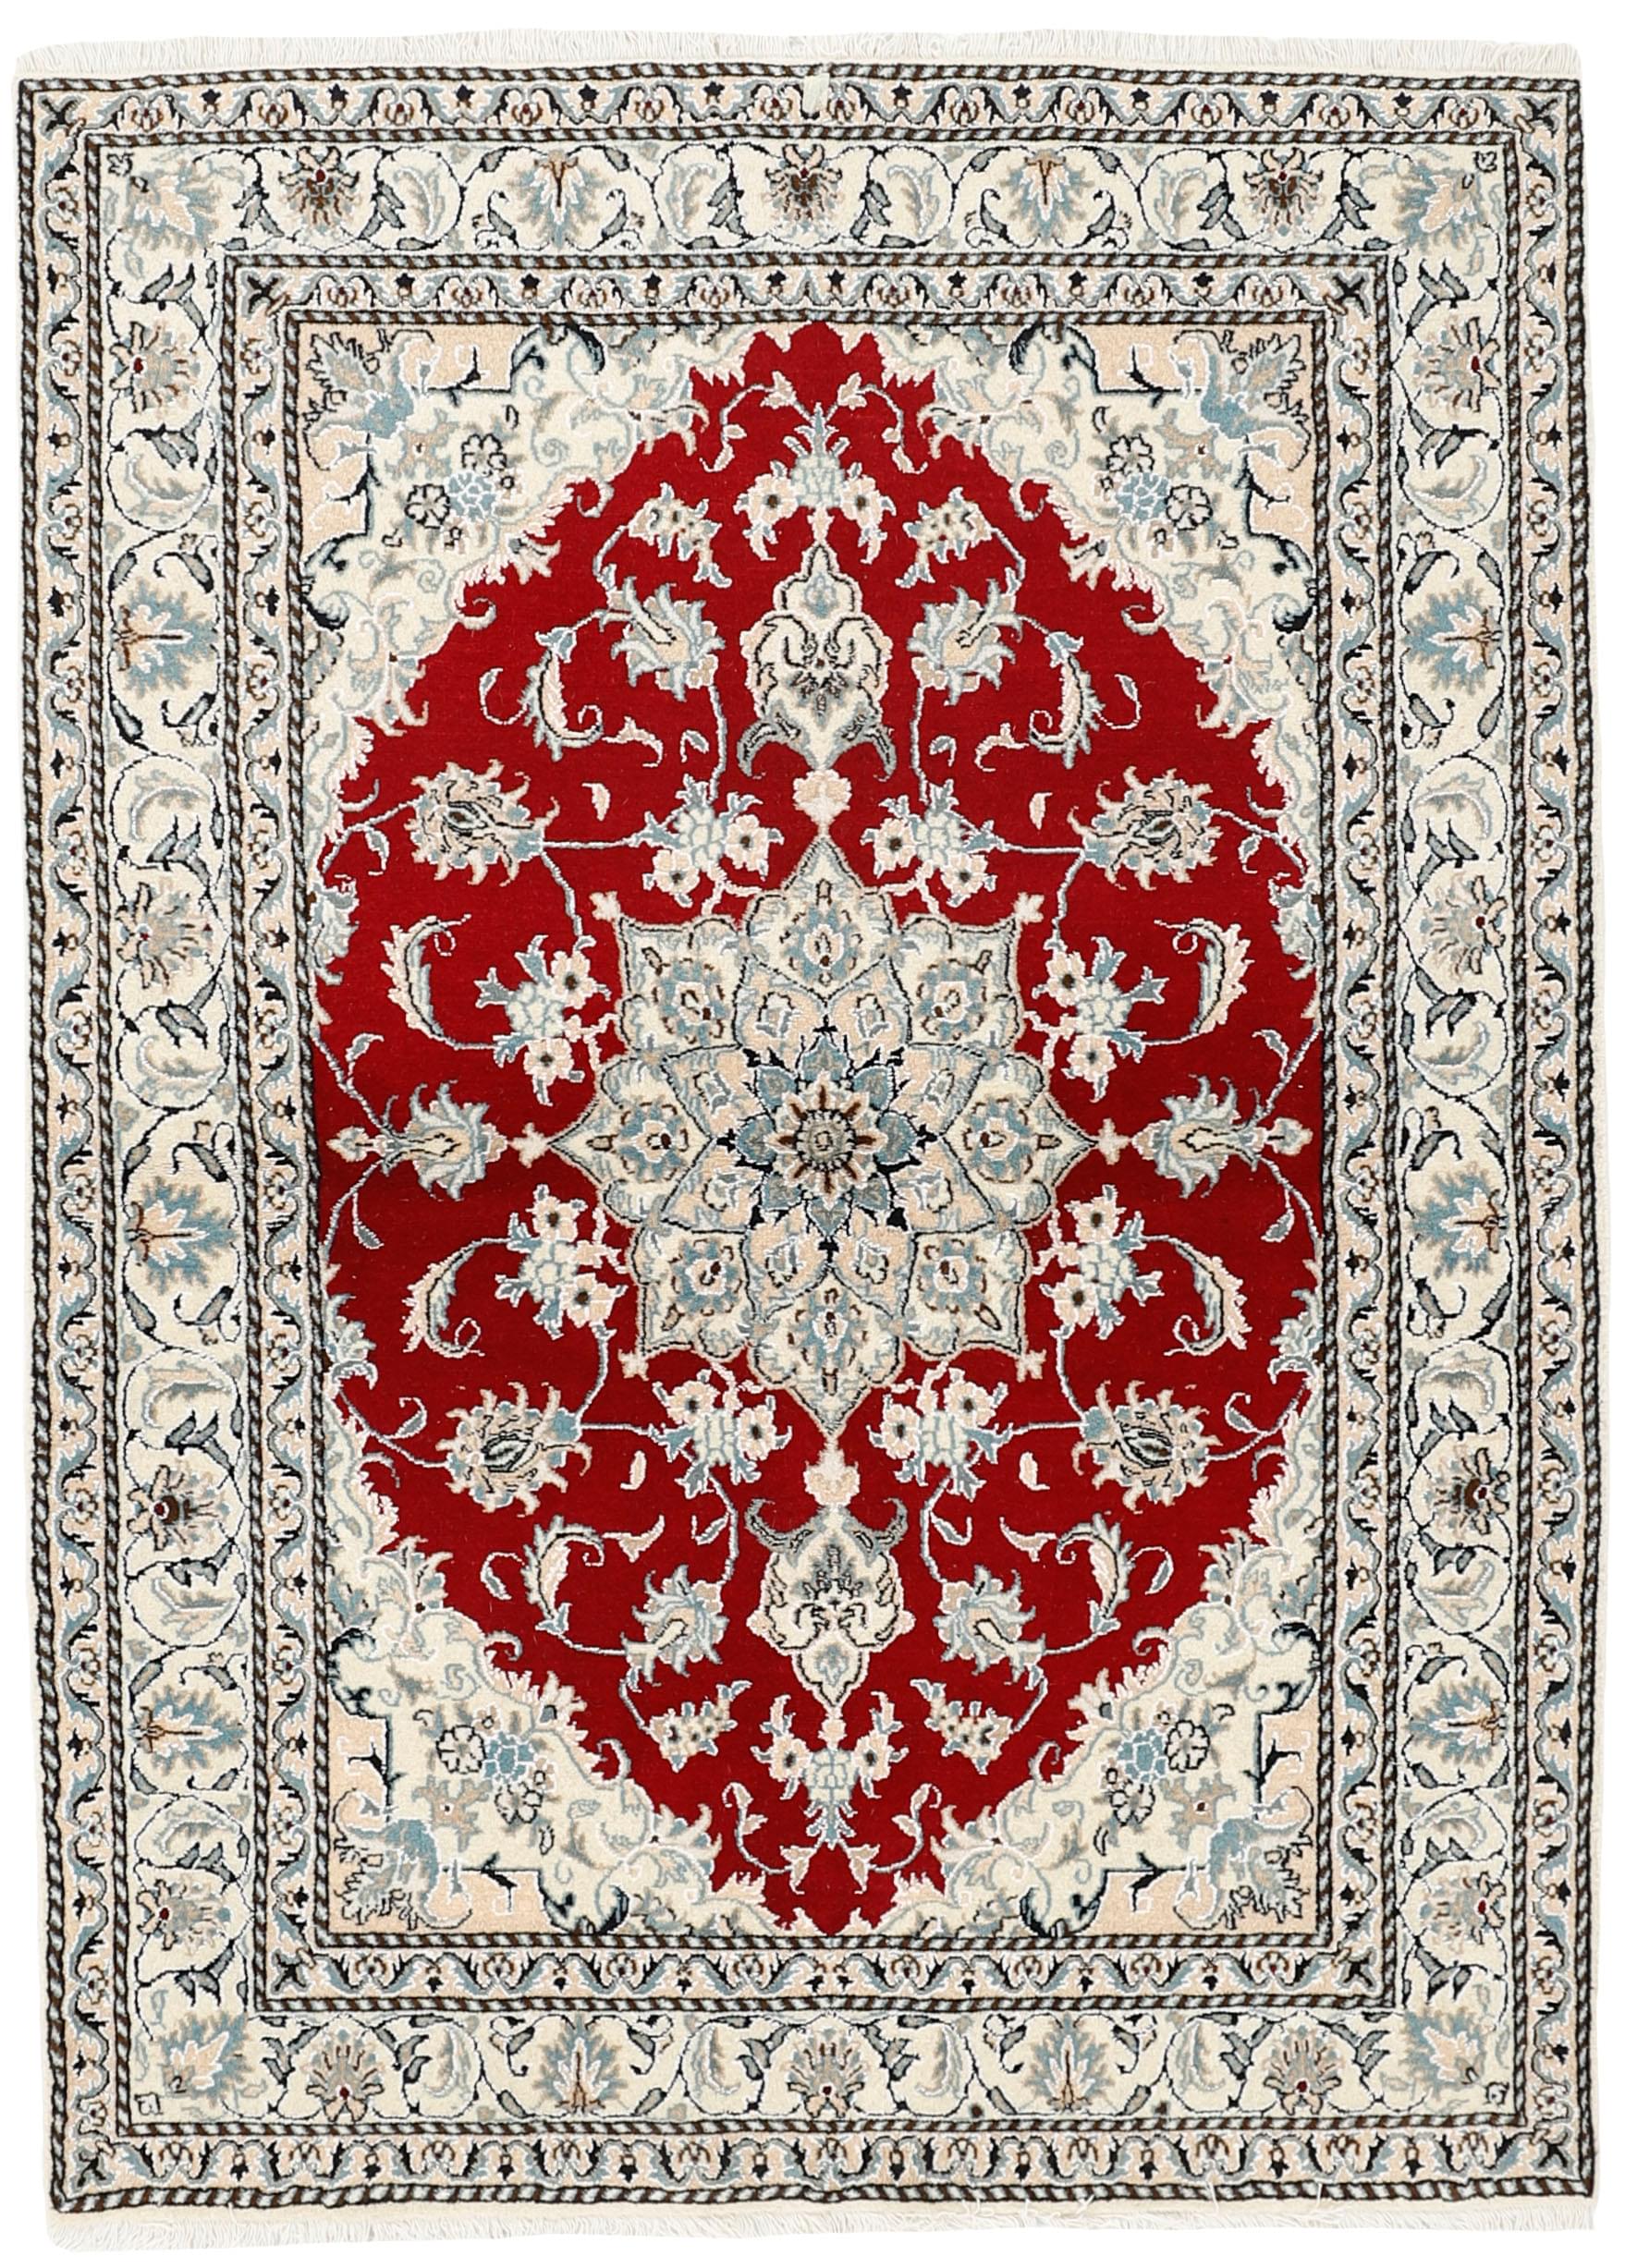 Authentic persian rug with a traditional floral design in red, cream and blue